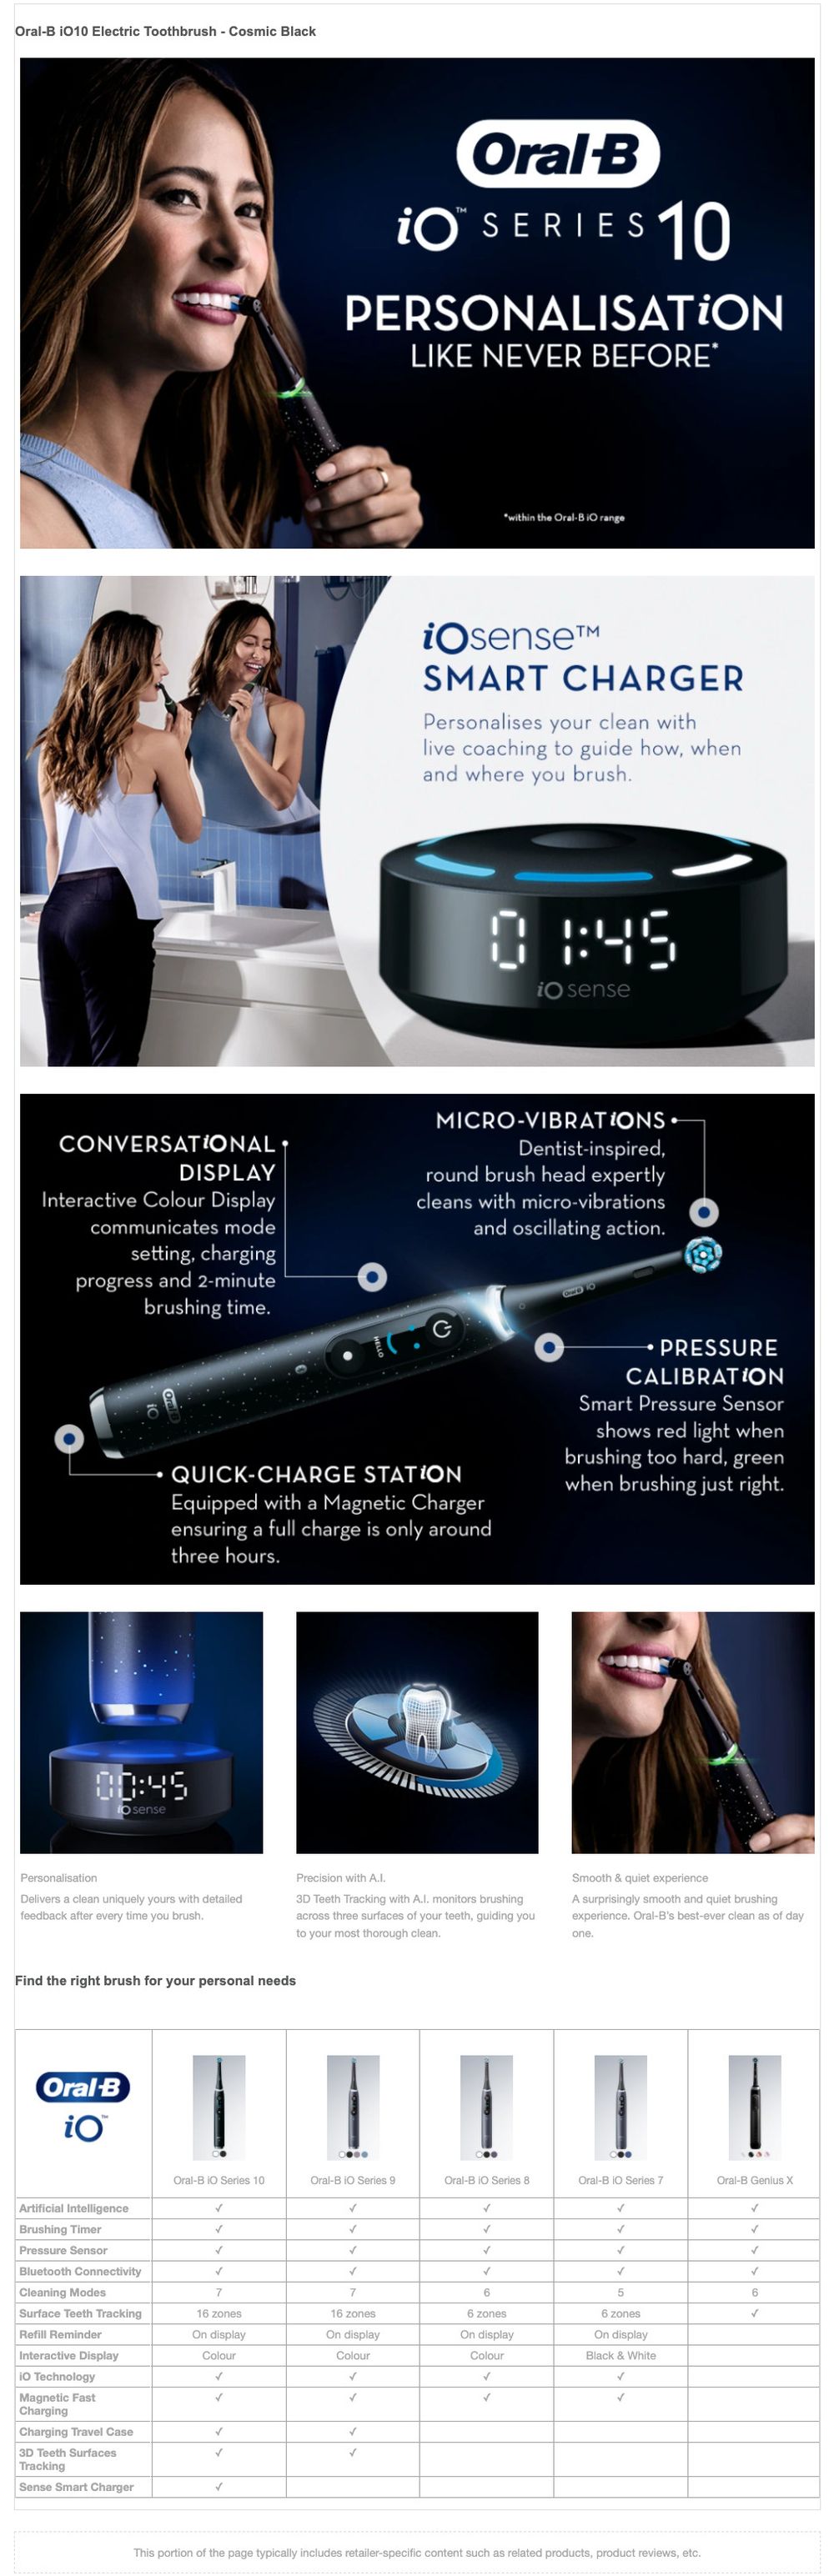 Oral-B 1010 Electric Toothbrush - Cosmic Black
                                  Oral B POR SERIES 10
                                  PERSONALISATION
                                  LIKE NEVER BEFORE
                                  within the Oral-B Orange
                                  iOsenset SMART CHARGER Personalises your clean with live coaching to guide how, when and where you brush.
                                  io sense
                                  CONVERSATIONAL
                                  DISPLAY Interactive Colour Display communicates mode
                                  setting, charging progress and 2-minute
                                  brushing time.
                                  MICRO-VIBRATIONS
                                  Dentist-inspired, 'round brush head expertly cleans with micro-vibrations
                                  and oscillating action.
                                  стро
                                  PRESSURE
                                  CALIBRATION Smart Pressure Sensor
                                  shows red light when brushing too hard, green when brushing just right.
                                  QUICK-CHARGE STATION Equipped with a Magnetic Charger ensuring a full charge is only around three hours.
                                  00:45
                                  lo sense
                                  Personalisation Delivers a clean uniquely yours with detailed feedback after every time you brush.
                                  Precision with A.I. 3D Teeth Tracking with A.l. monitors brushing across three surfaces of your teeth, guiding you to your most thorough clean.
                                  Smooth & quiet experience A surprisingly smooth and quiet brushing experience. Oral-B's best-ever clean as of day
                                  one.
                                  Find the right brush for your personal needs
                                  Oral B
                                  Oral-B IO Series 10
                                  Oral-B IO Series 9
                                  Oral-B IO Series 8
                                  Oral-B IO Series 7
                                  Oral-B Genius X
                                  Artificial Intelligence Brushing Timer Pressure Sensor Bluetooth Connectivity Cleaning Modes Surface Teeth Tracking Refill Reminder Interactive Display io Technology Magnetic Fast Charging Charging Travel Case 3D Teeth Surfaces Tracking Sense Smart Charger
                                  16 zones On display
                                  Colour
                                  16 zones On display
                                  Colour
                                  6 zones On display
                                  Colour
                                  6 zones On display Black & White
                                  This portion of the page typically includes retailer-specific content such as related products, product reviews, etc.